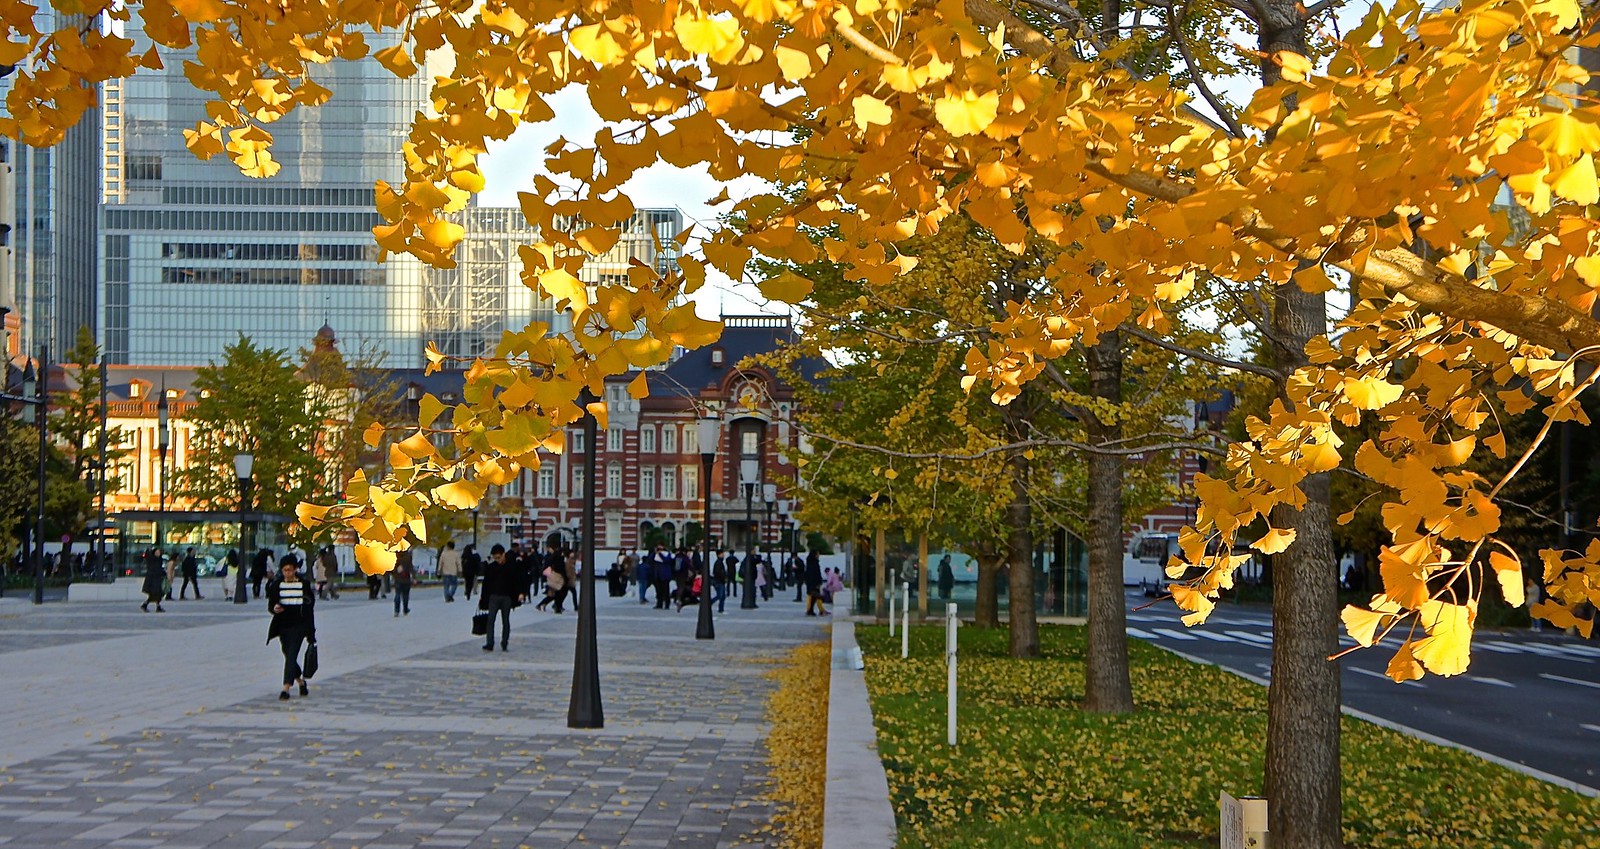 Tokyo Station in background with Ginkgo, Maidenhair color change 